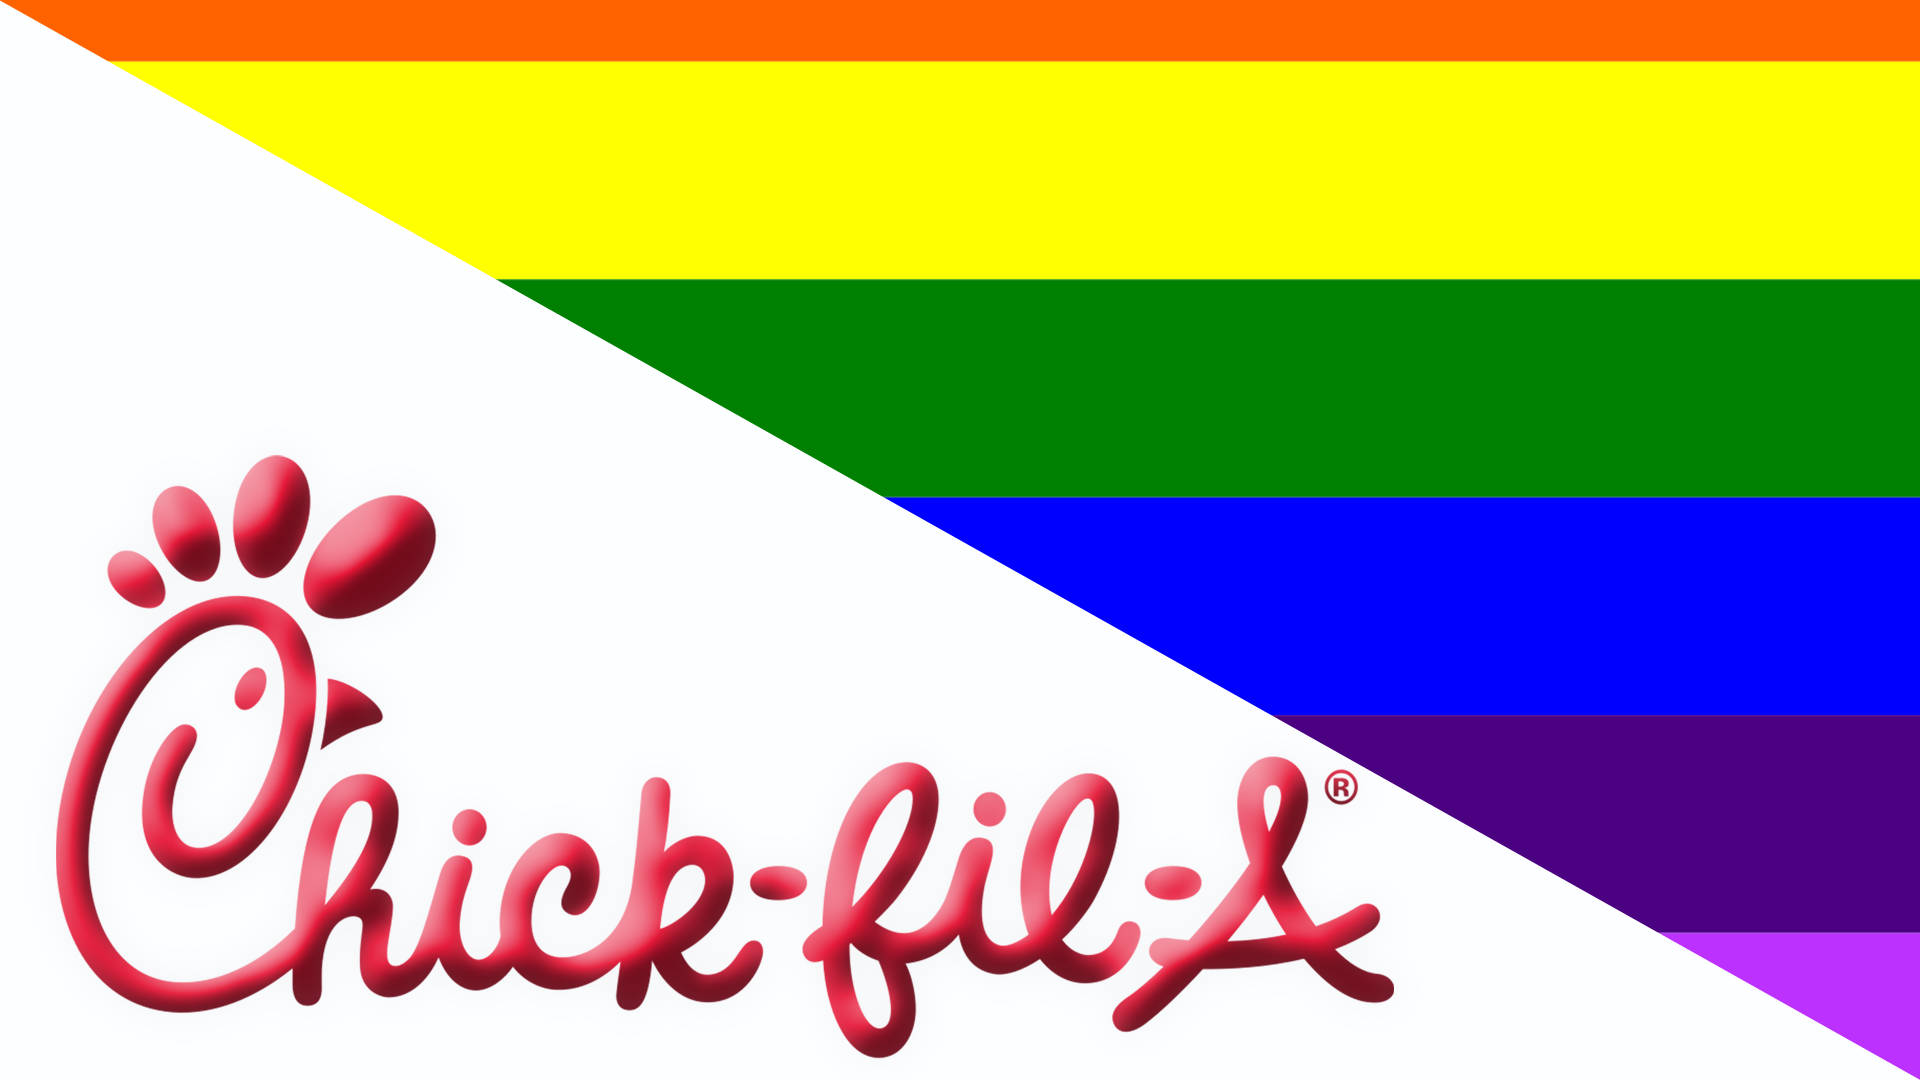 Chick Fil A Rainbow Poster Picture